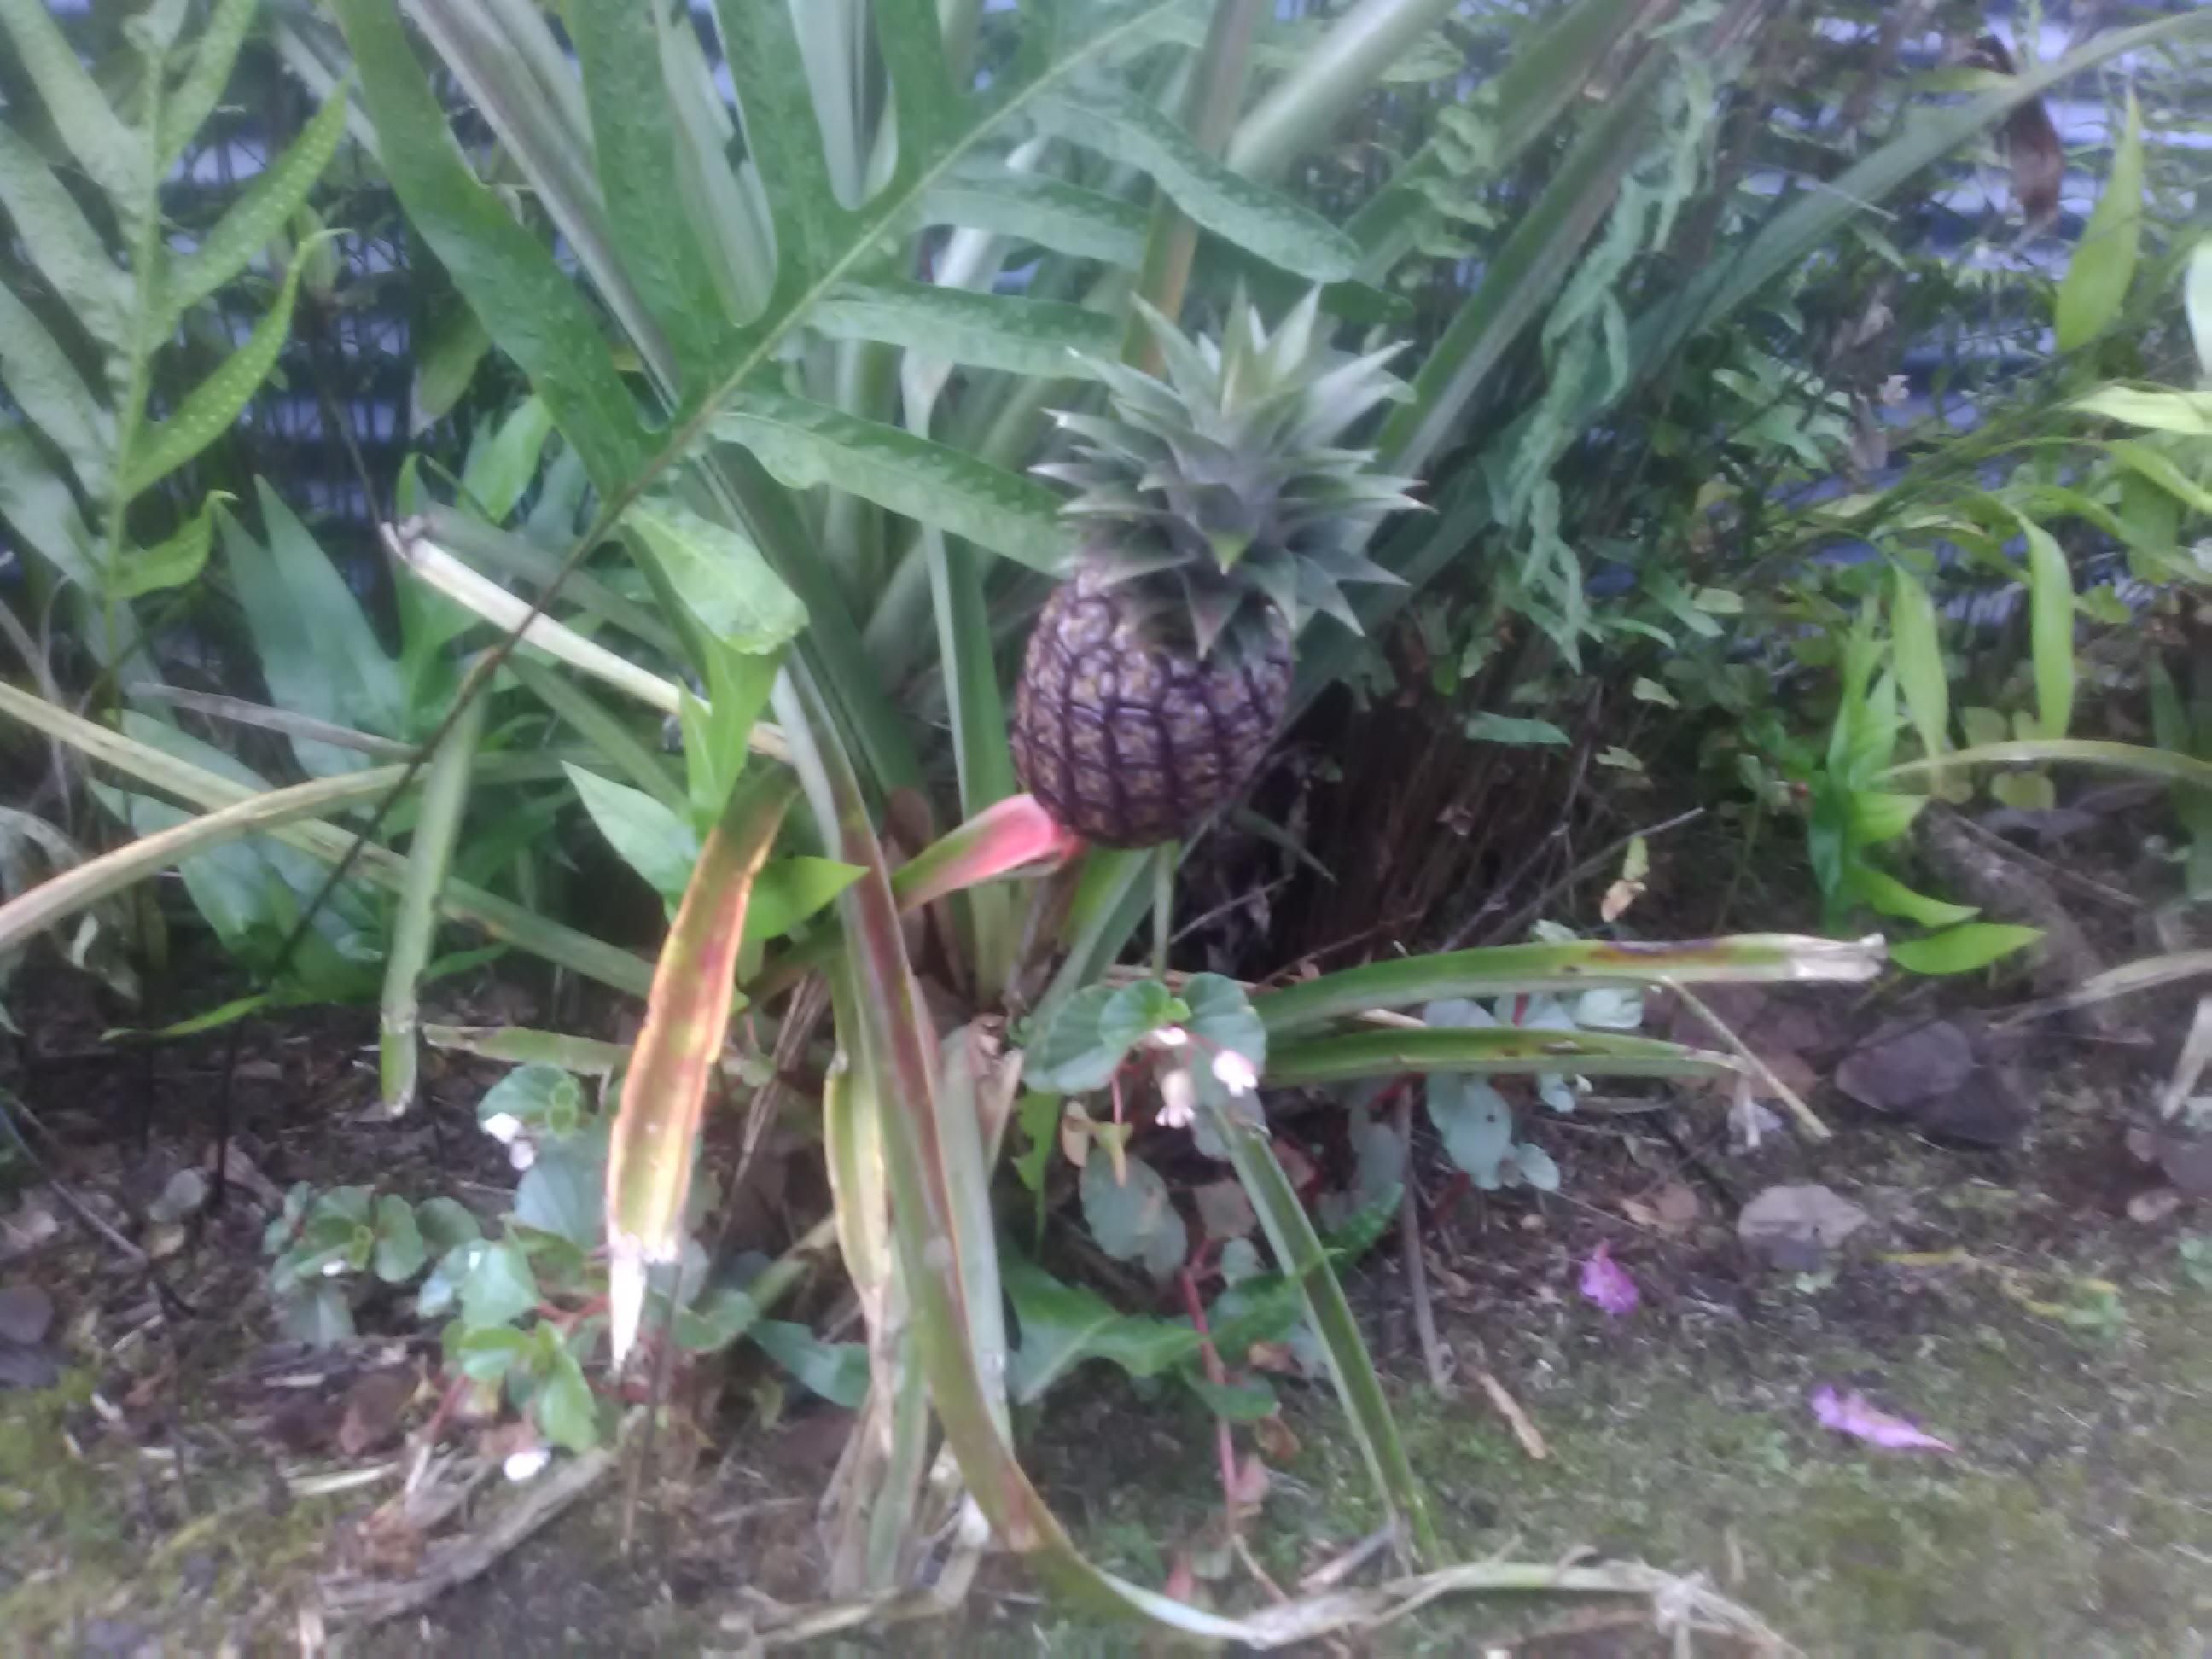 After doing literally nothing, I'm proud of the pineapple I accidentally grew